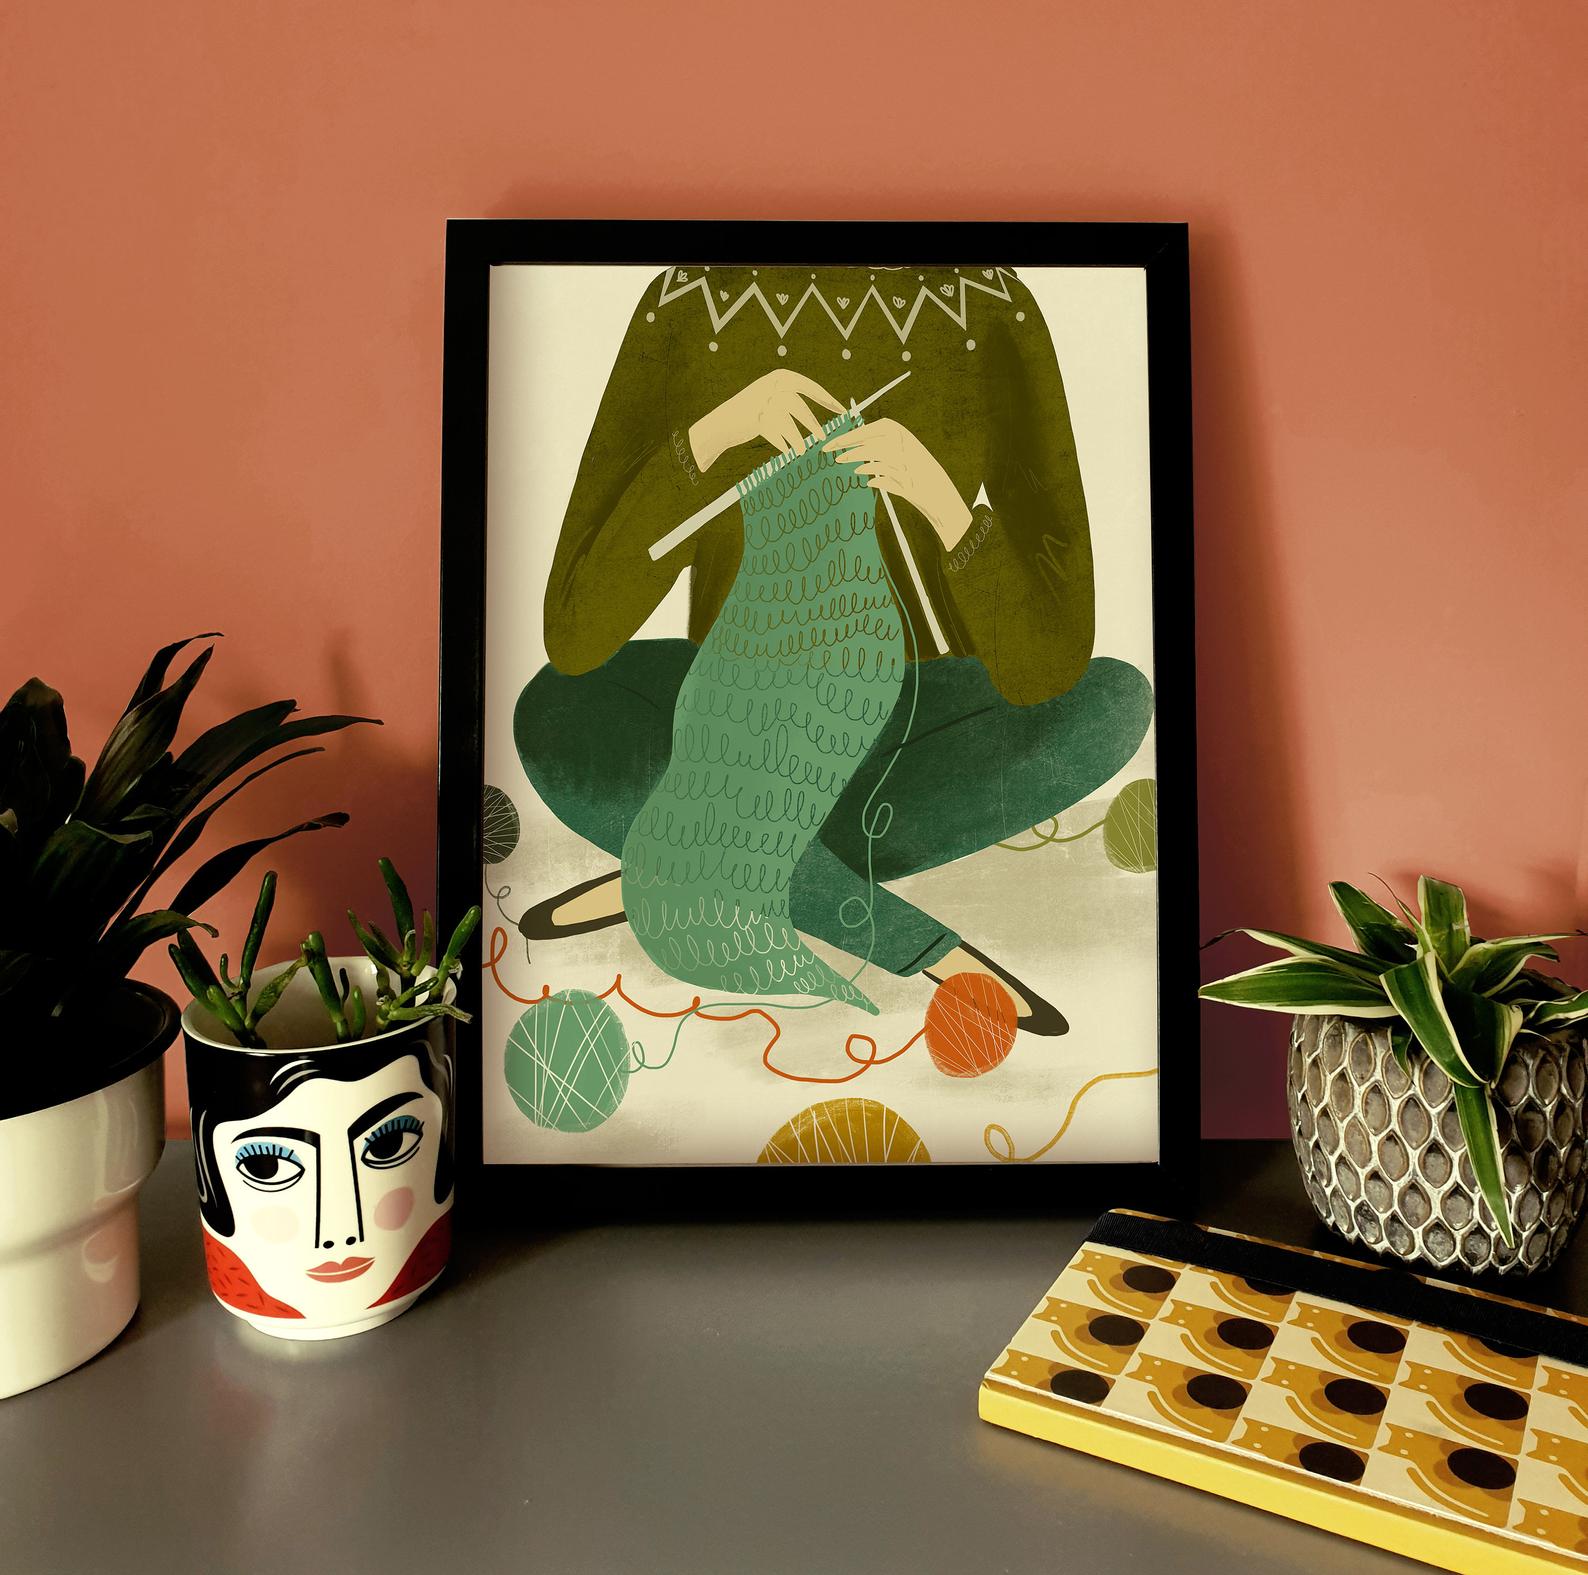 A print of a knitter from the shoulders down sitting cross legged and knitting a green scarf on straight needles. Next to the framed print are houseplant in pots.